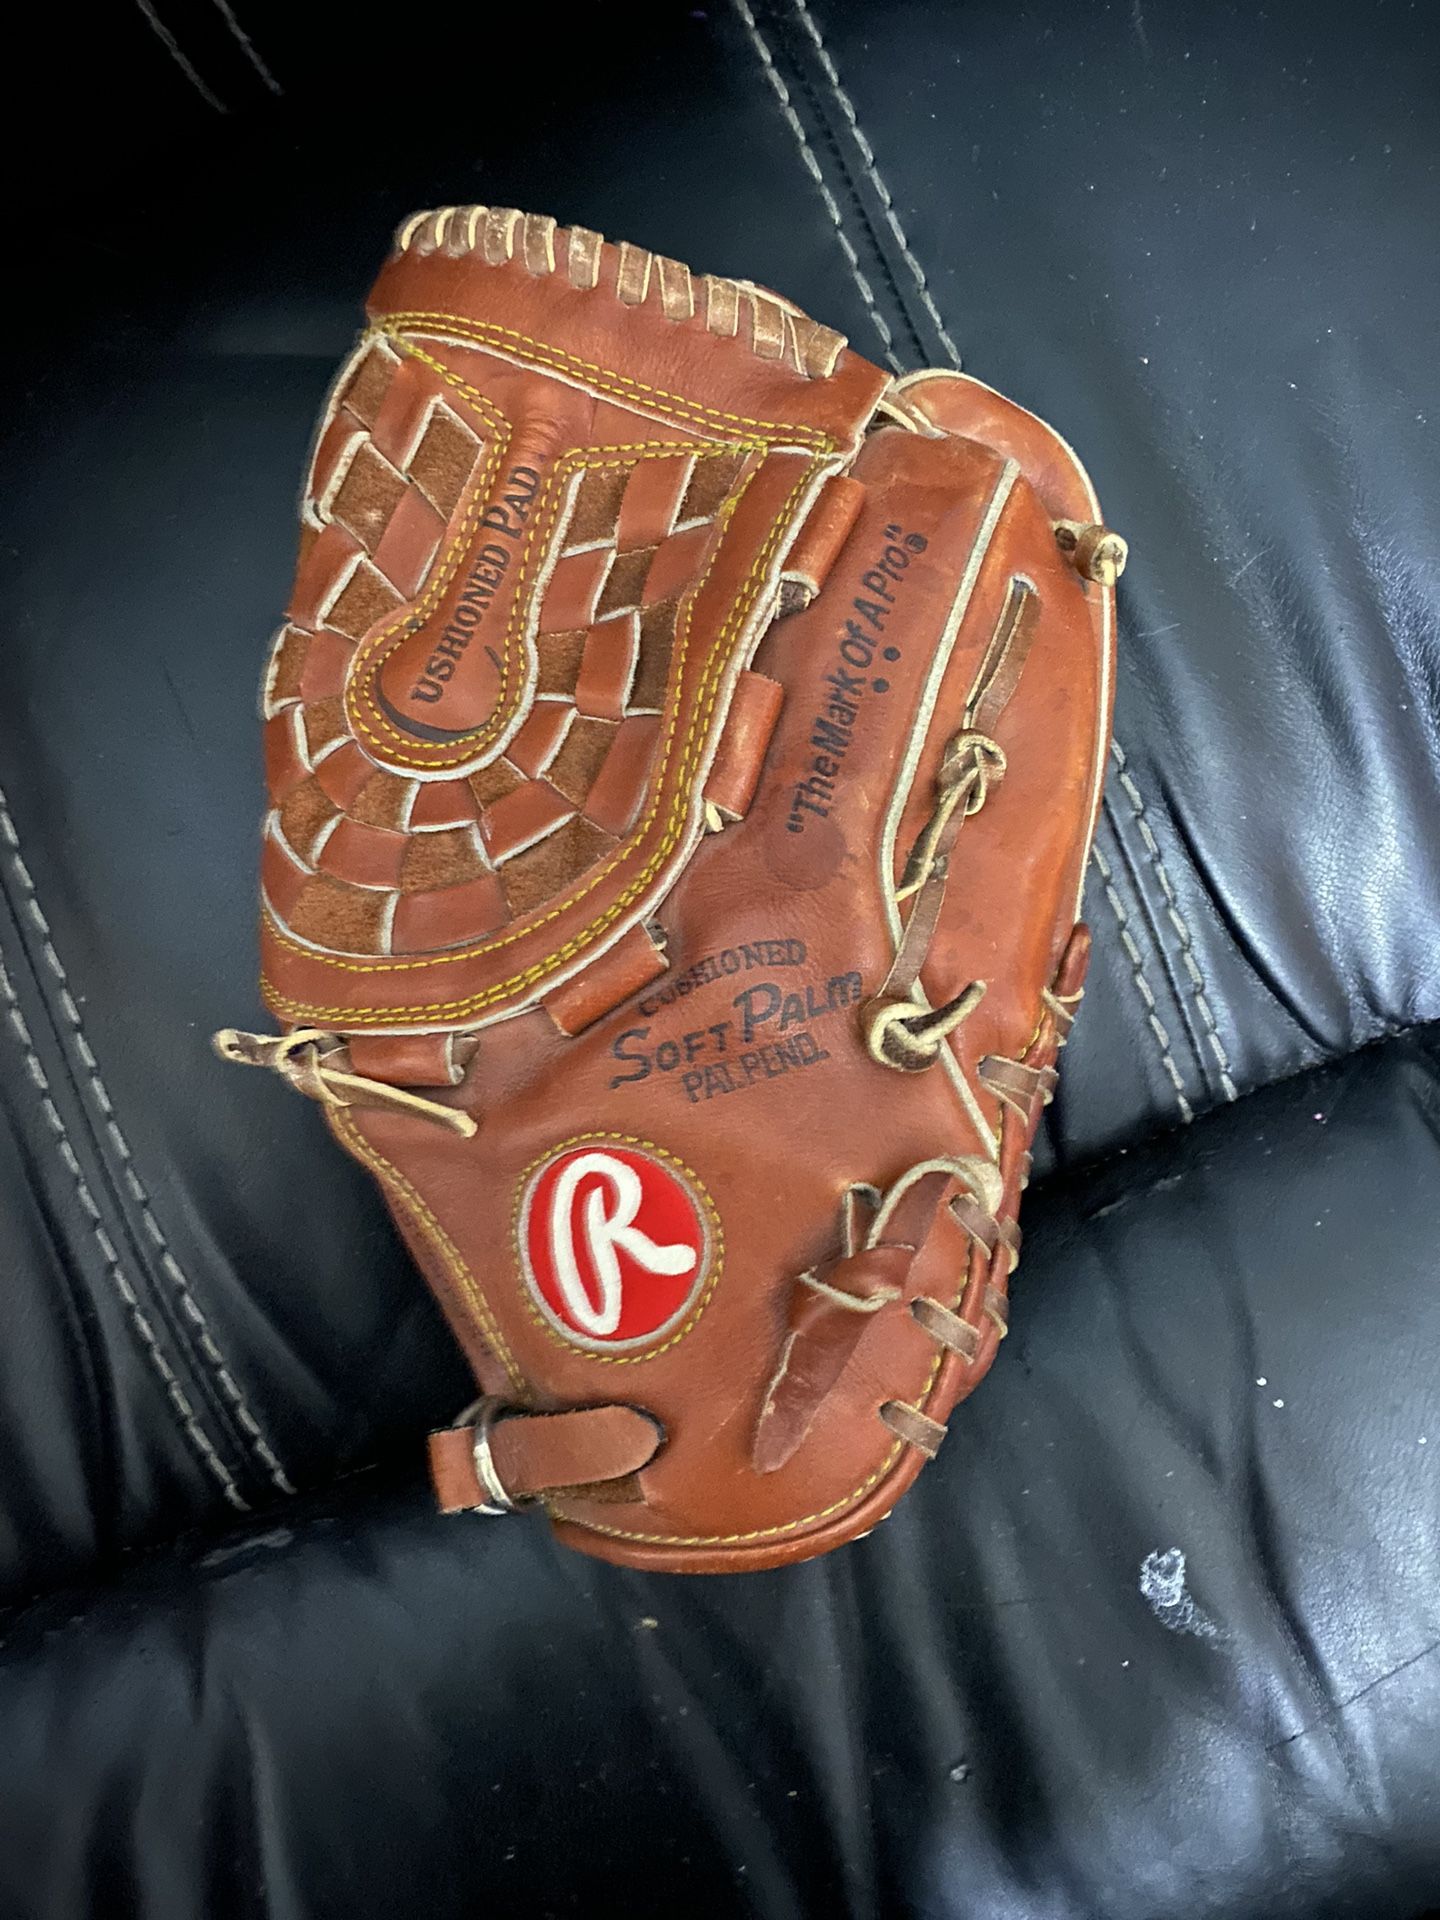 Vintage Rowlings “The Mark Of A Pro” Baseball Glove